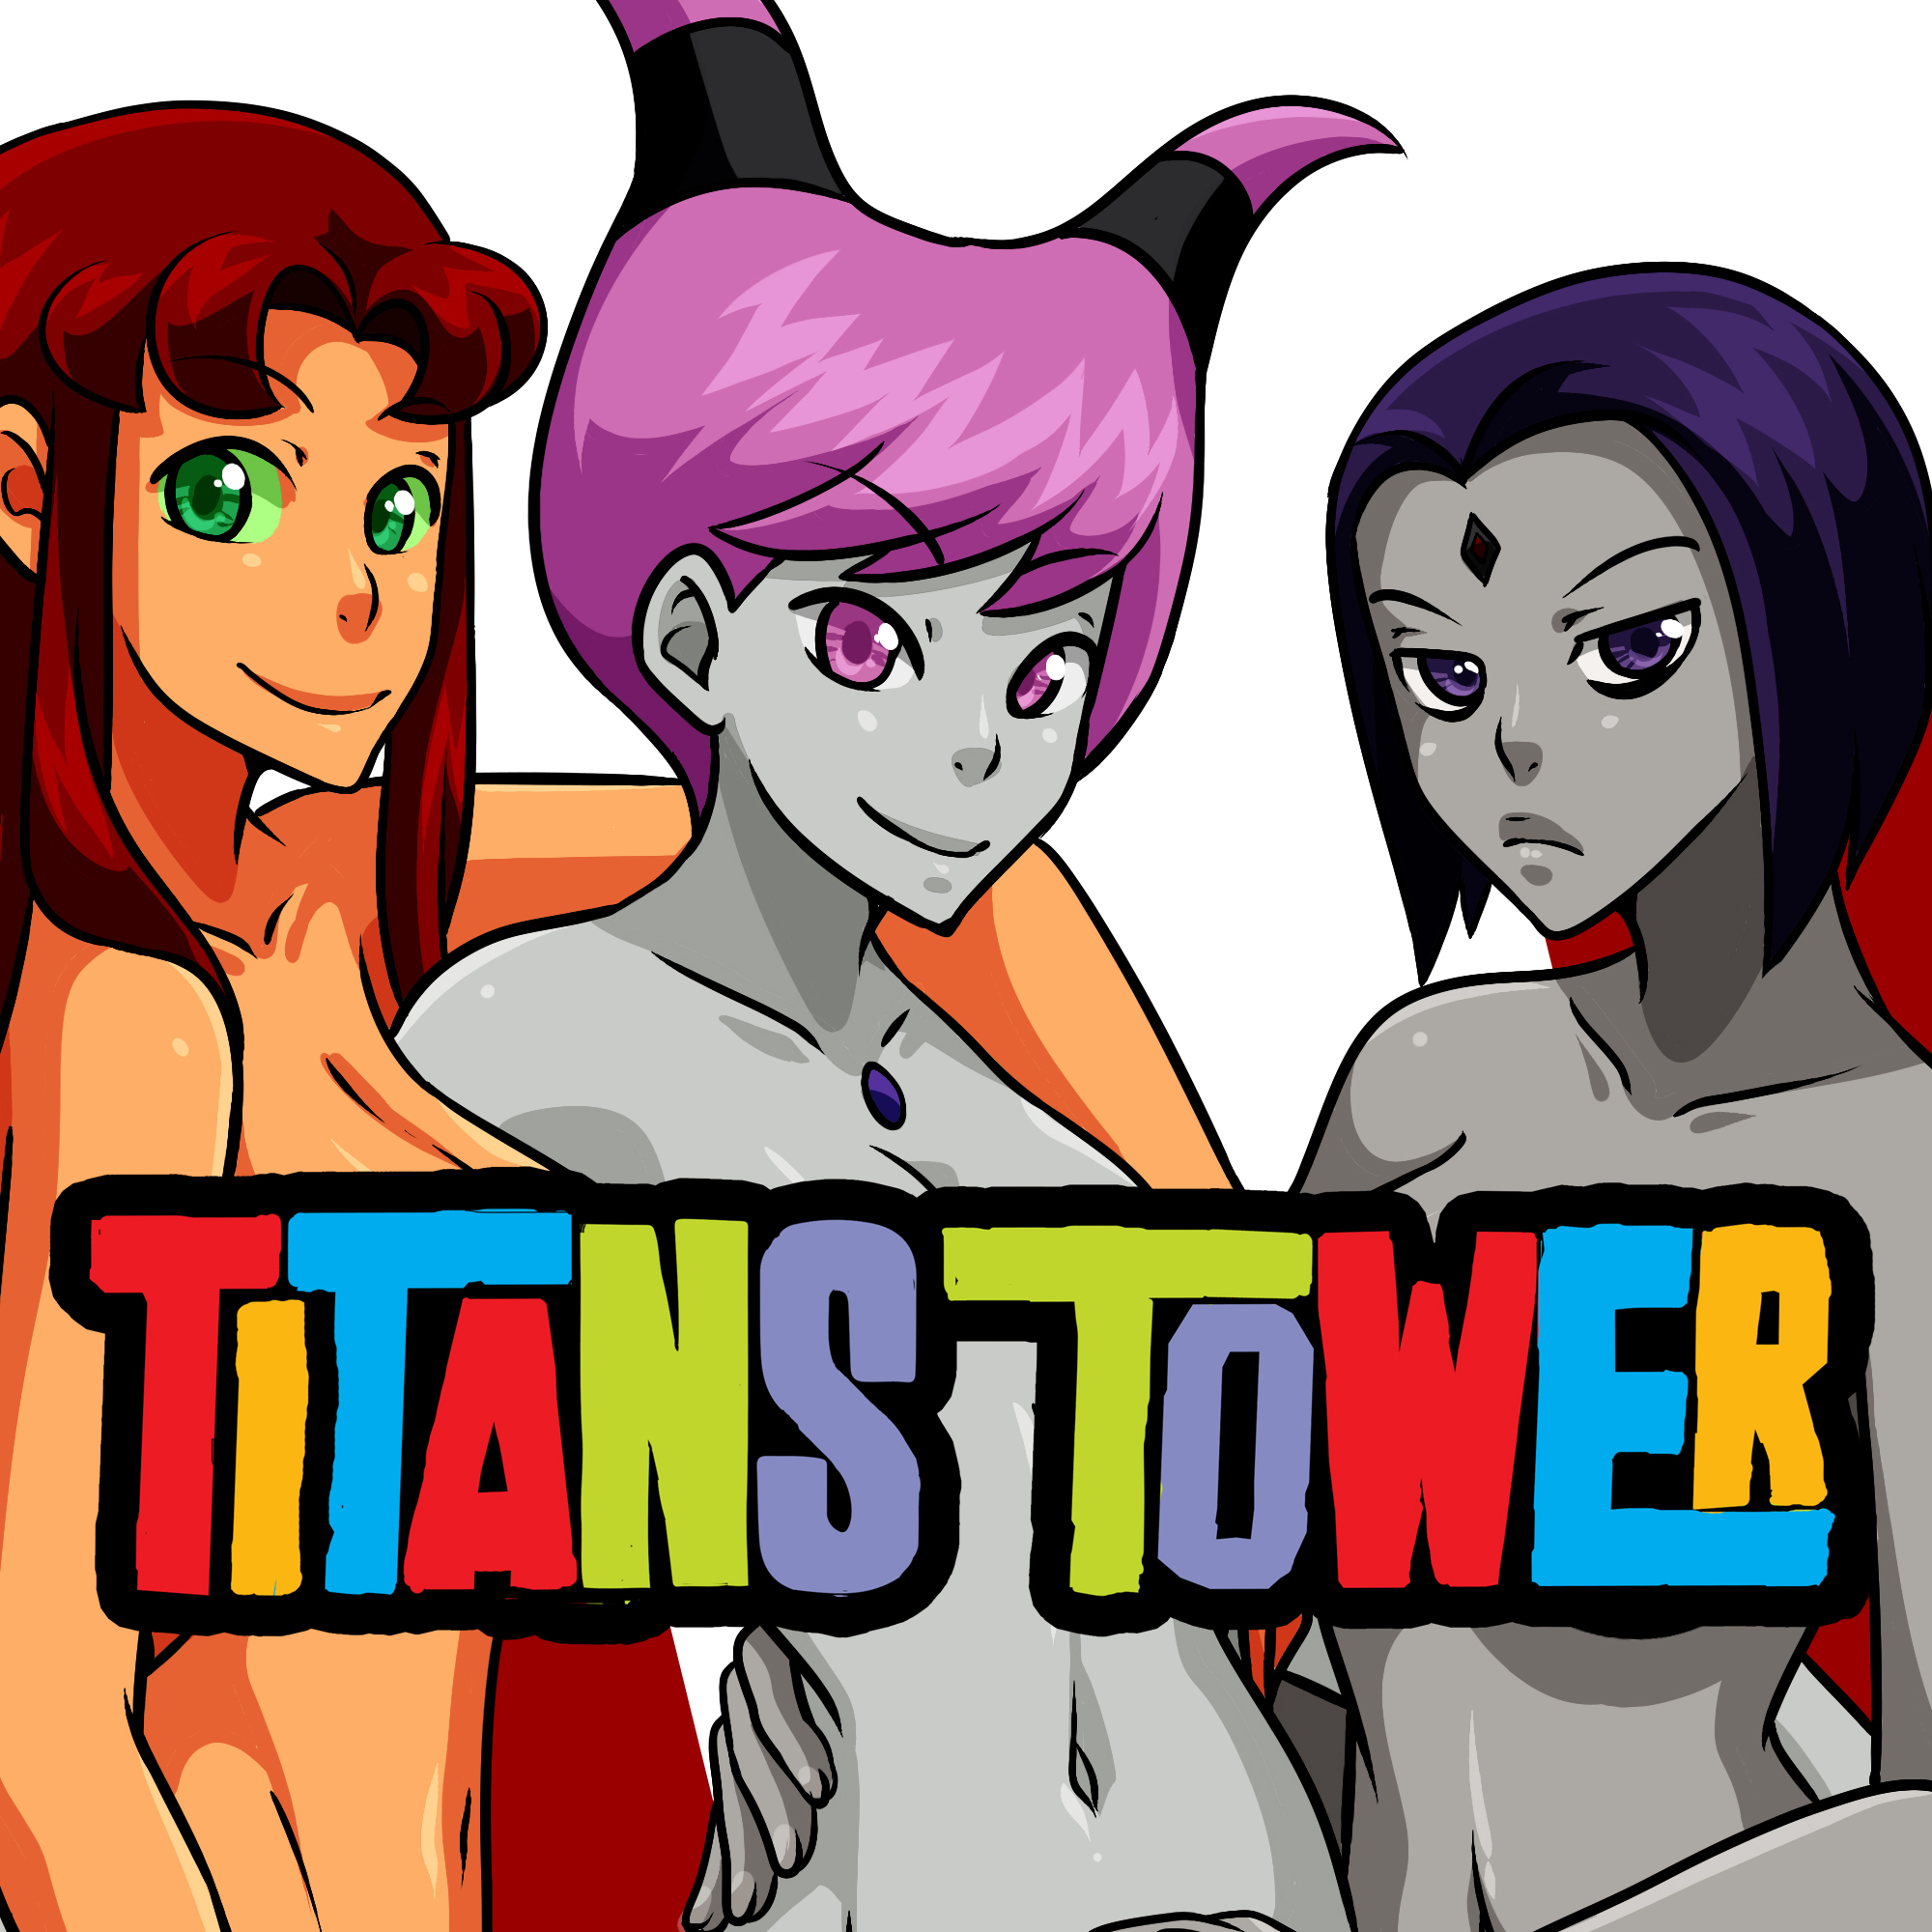 Demo] Titans Tower (Teen Titans Fan Game) by Sexyverse Comics